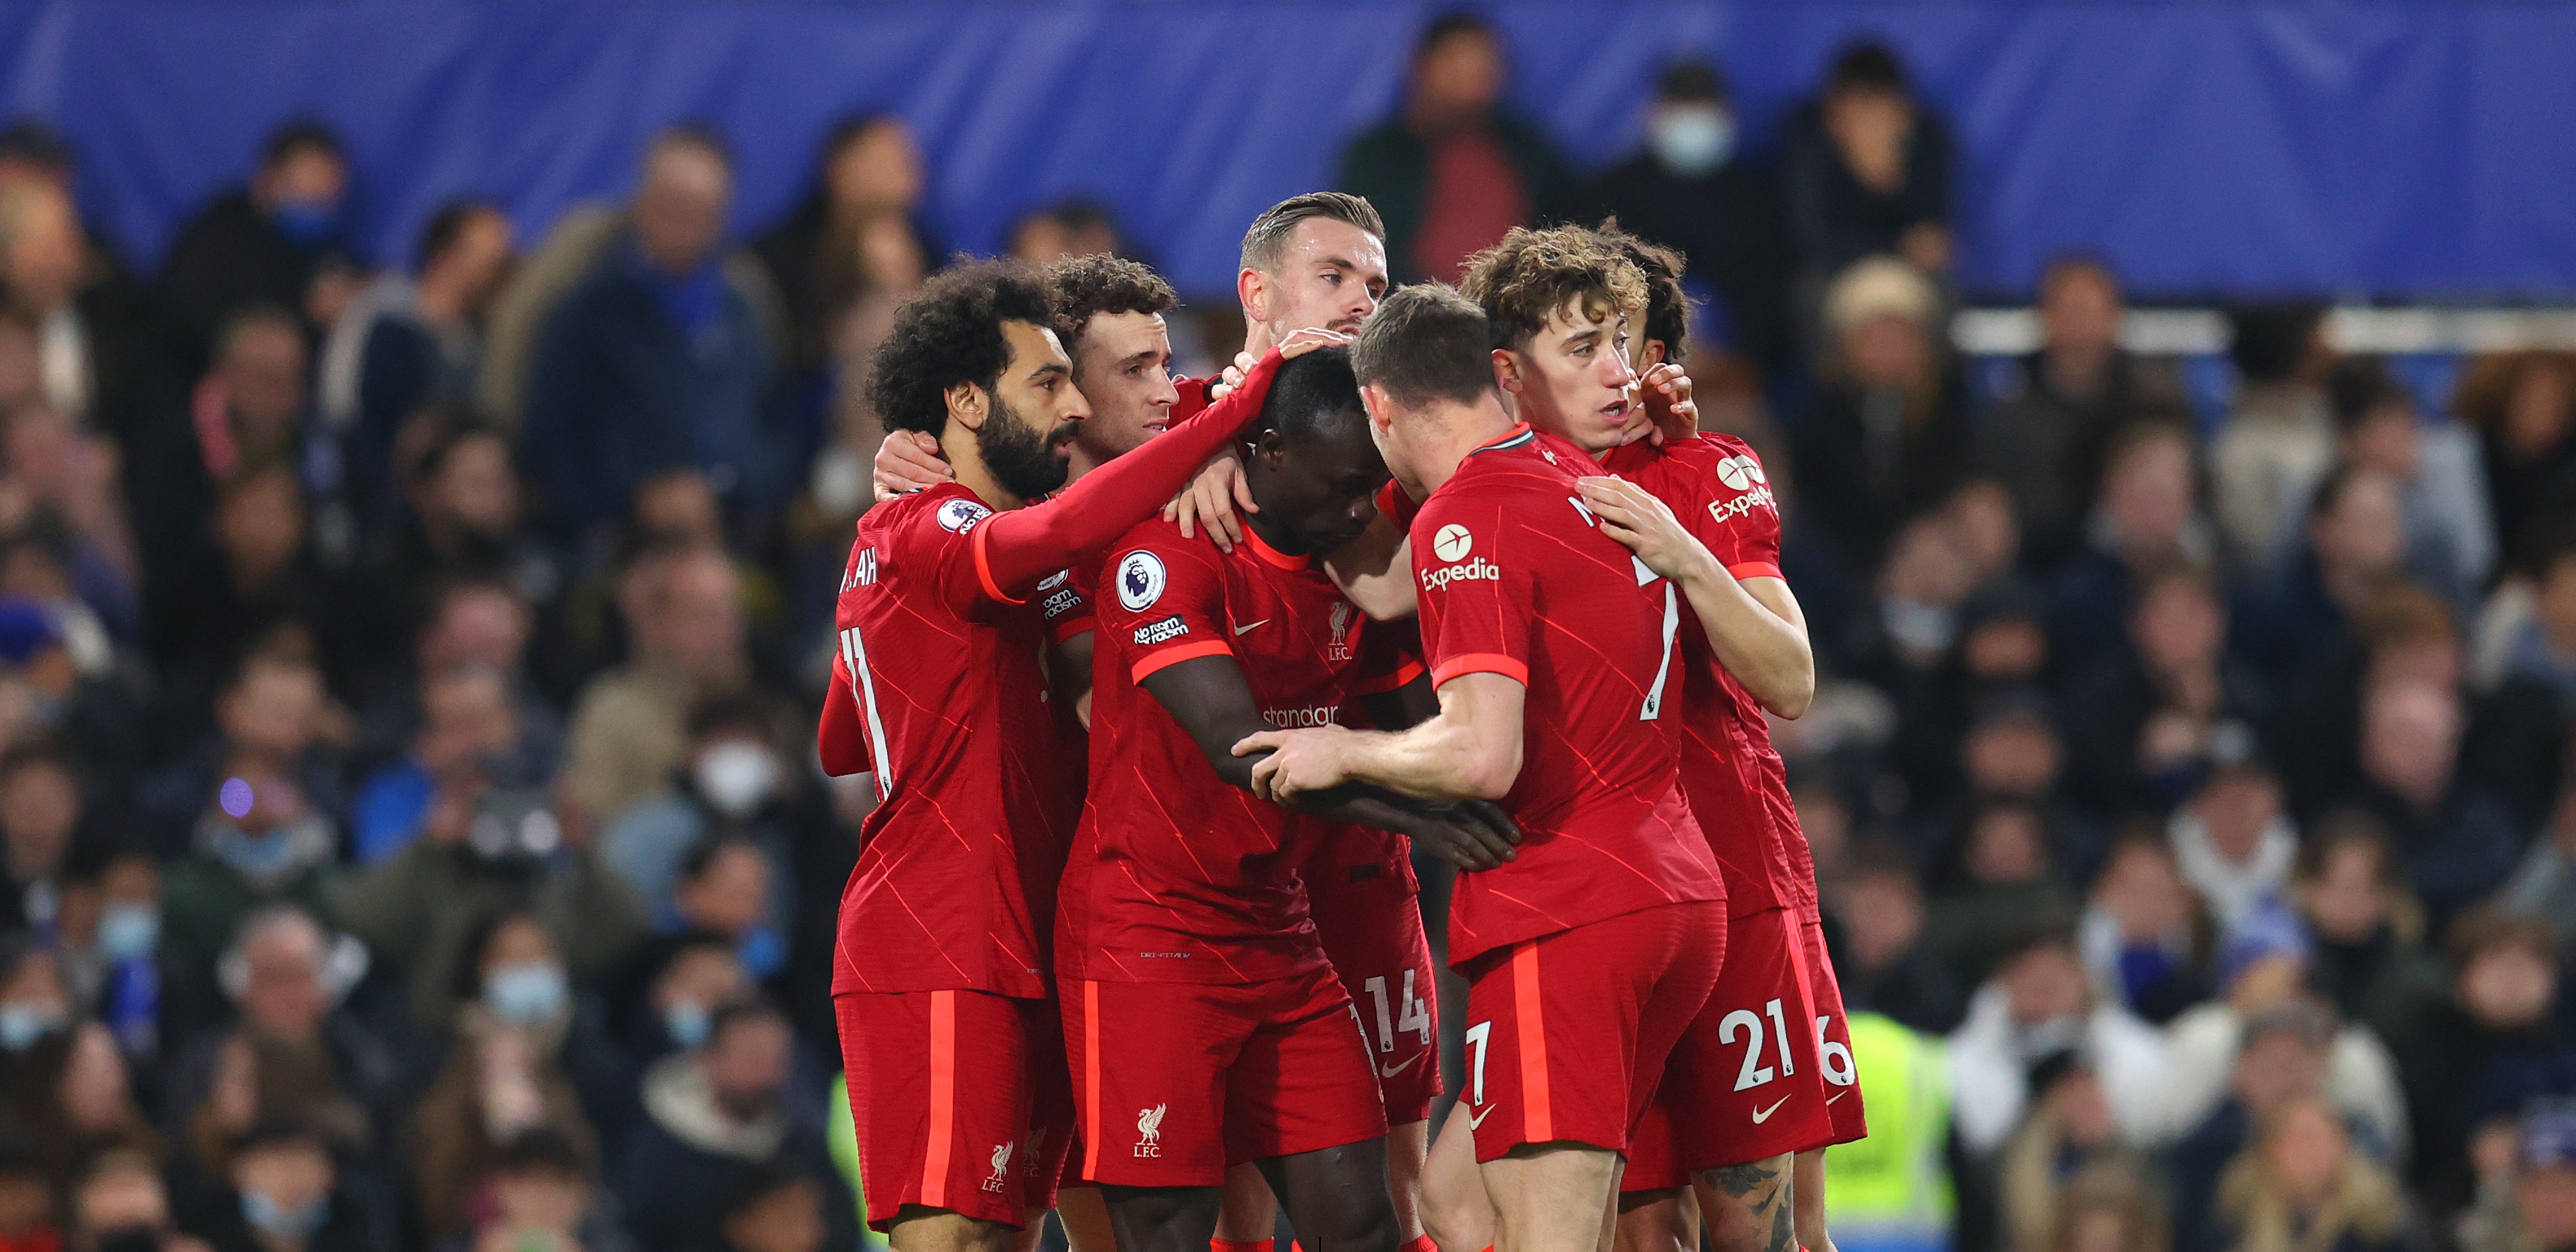 ‘Another semi final for us’ – James Milner delighted as Liverpool progress through to the Champions League semi-finals and now have ‘total focus’ on their Wembley FA Cup clash with Manchester City